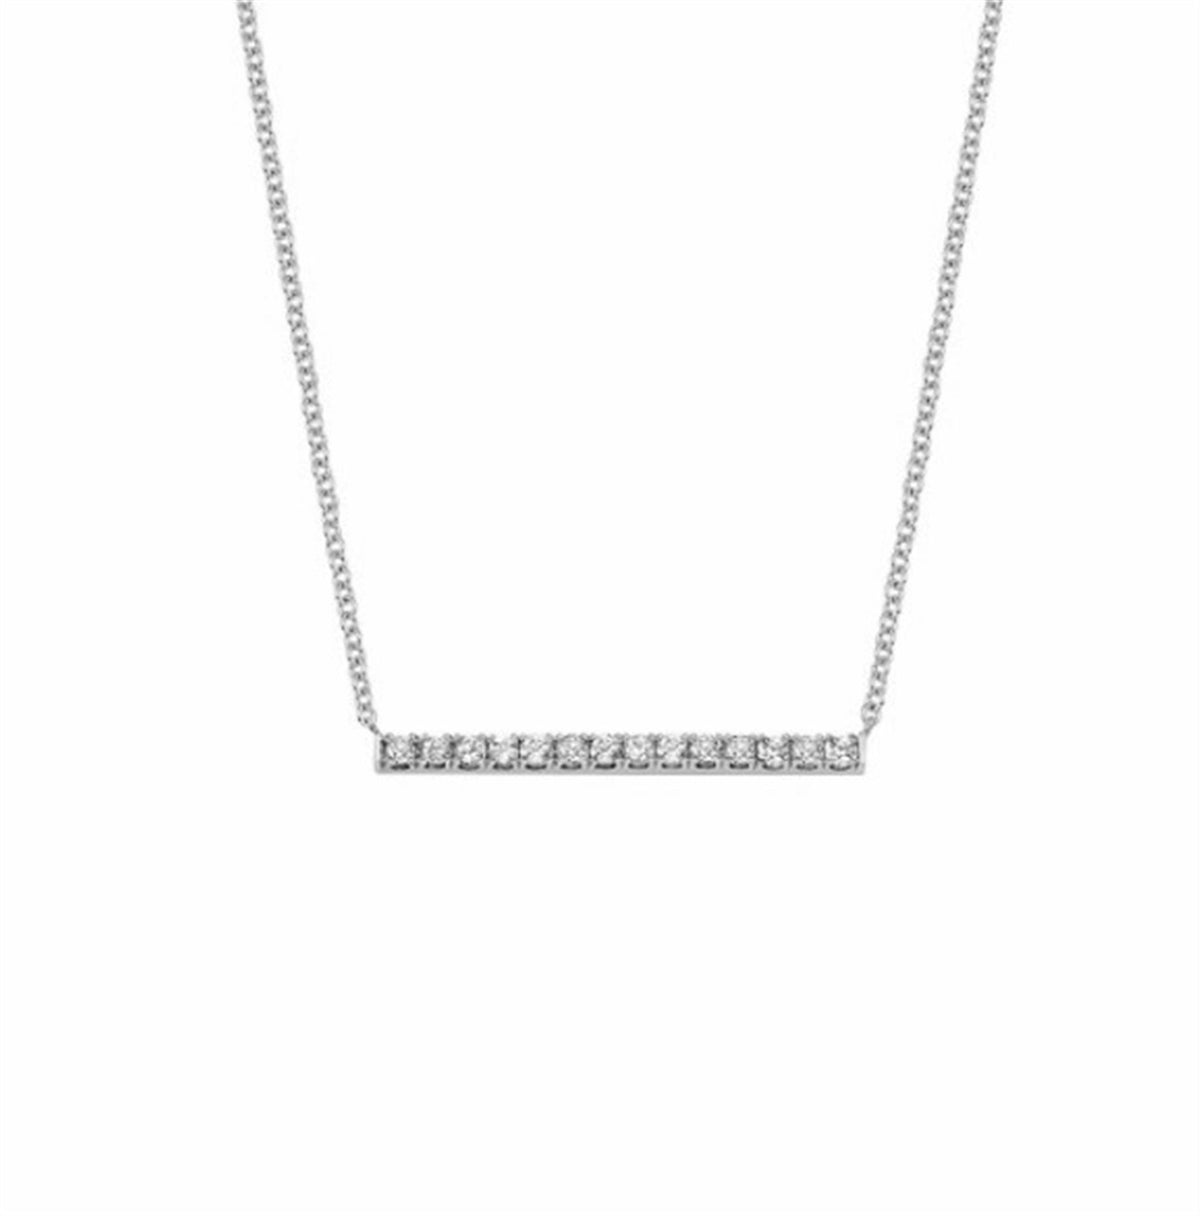 10kt White Gold Walk the Line Necklace With .10cttw Natural Diamonds